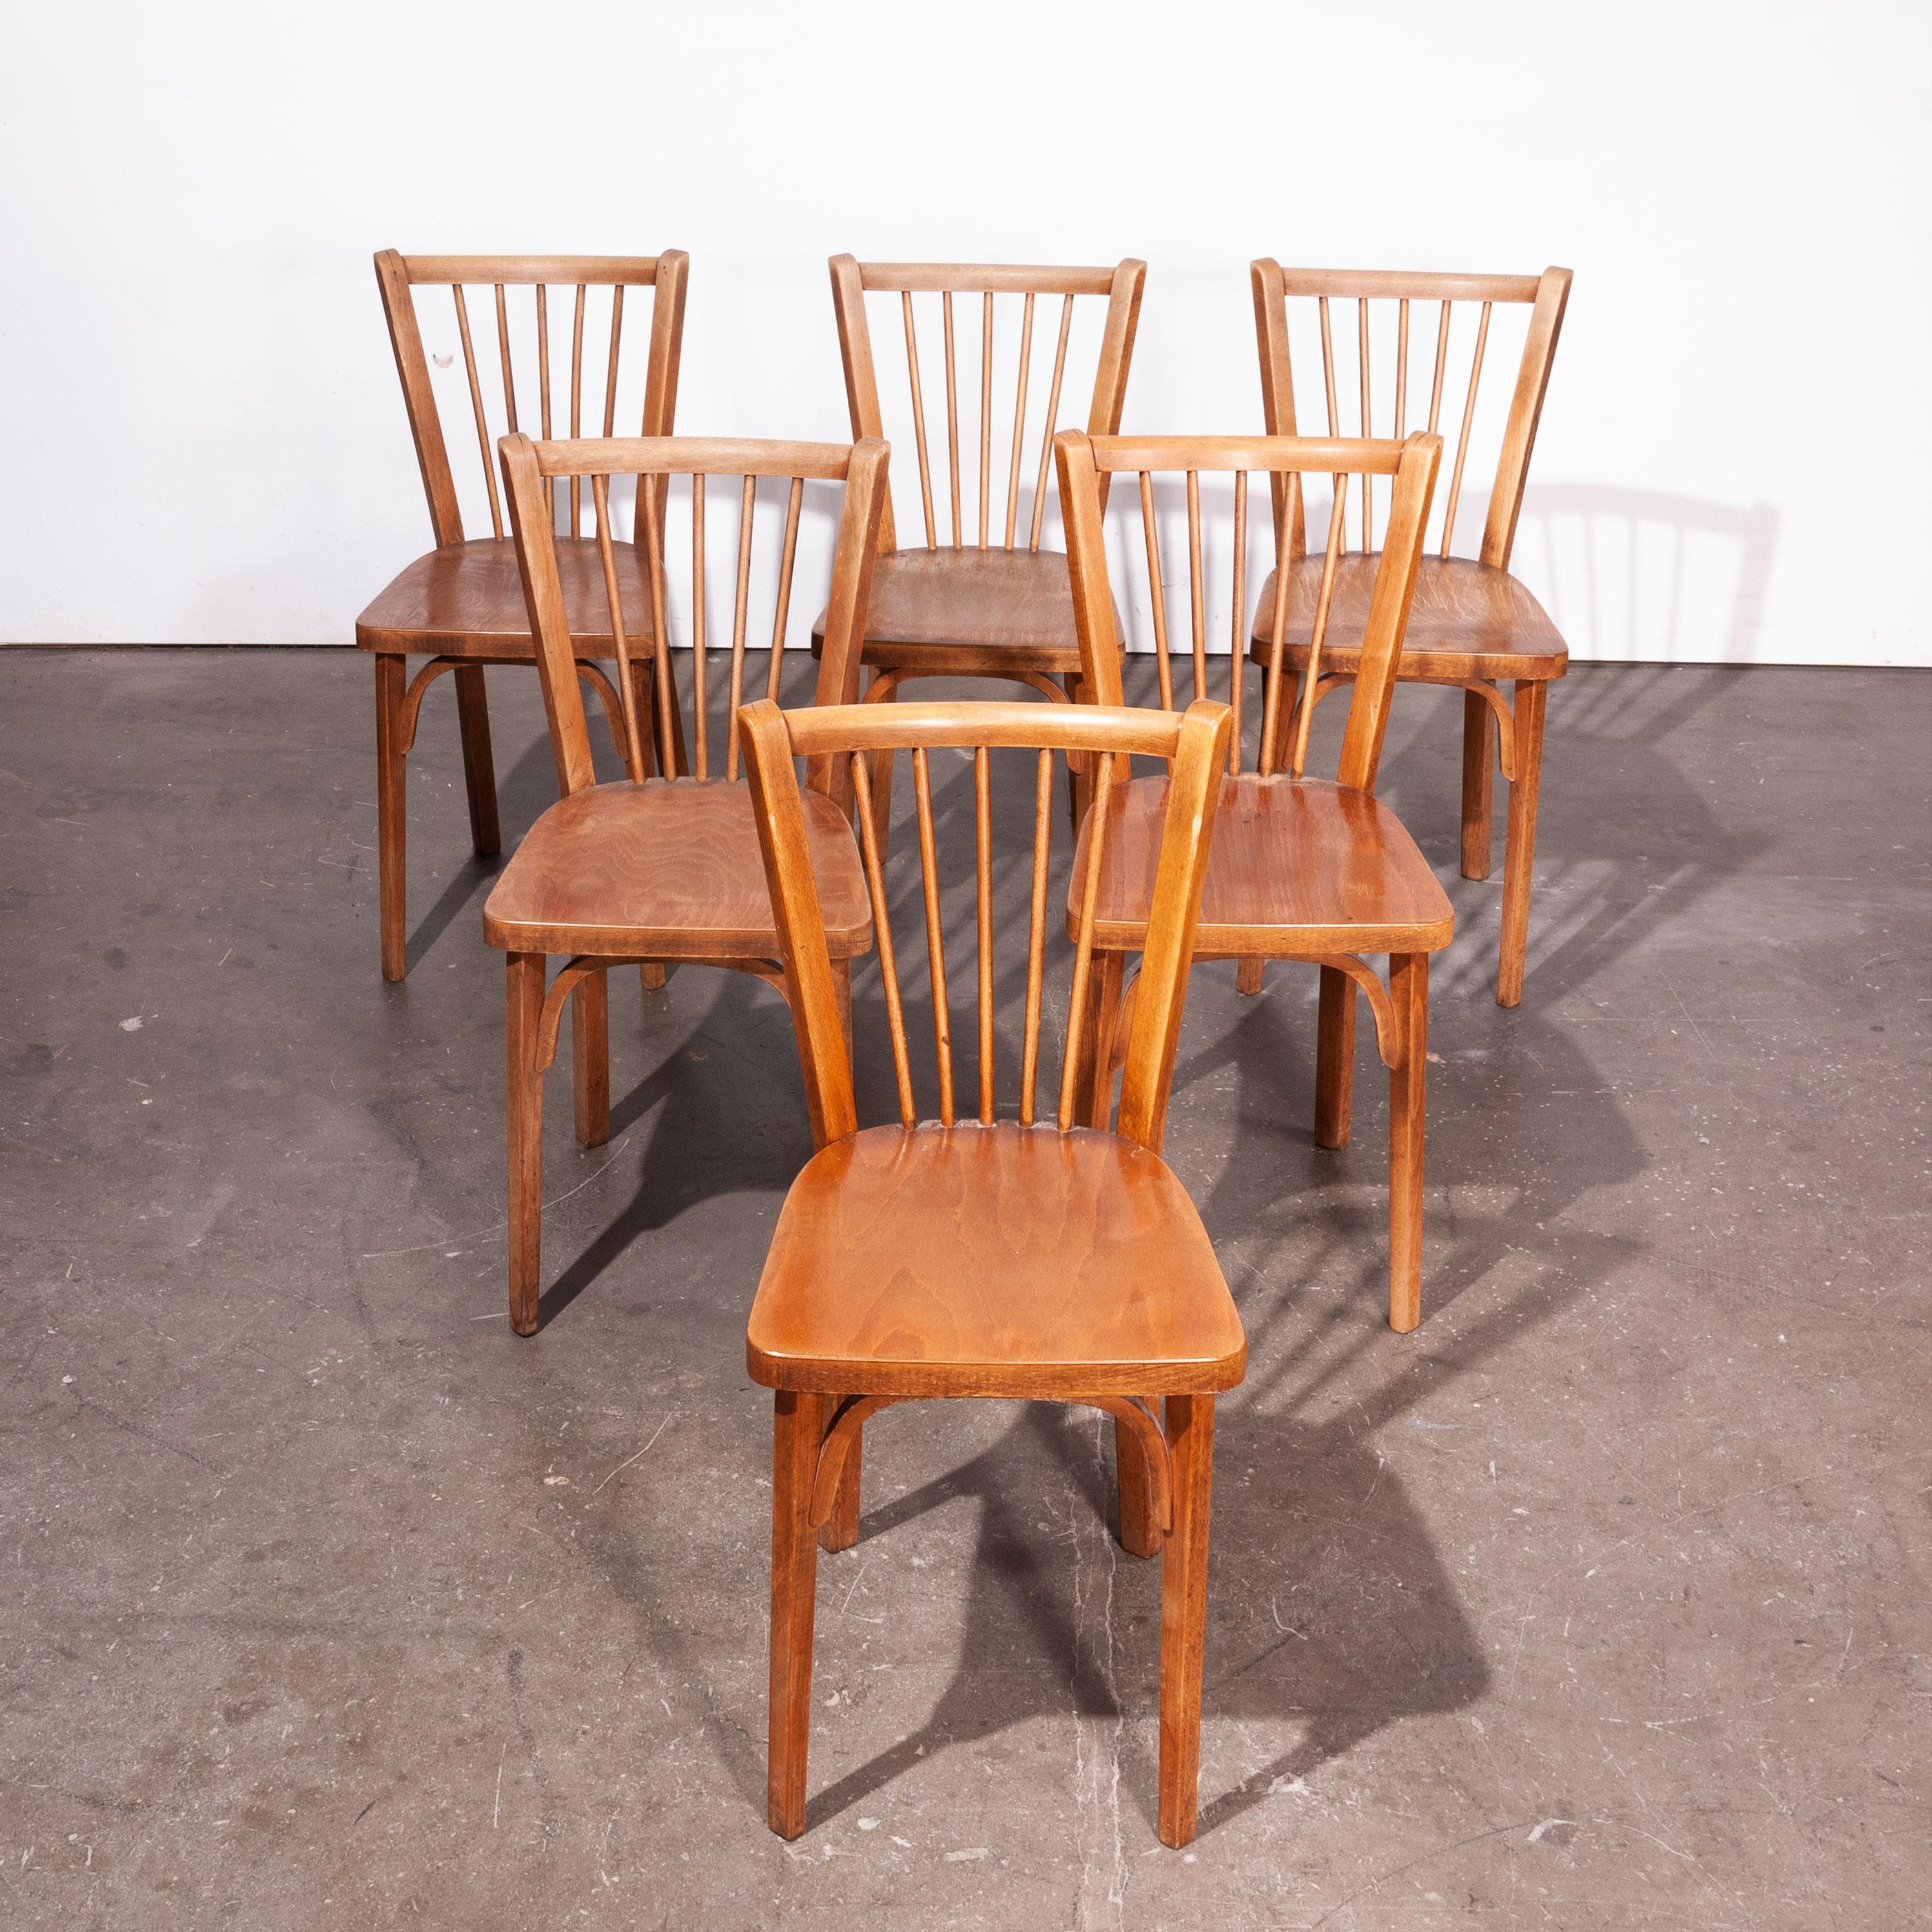 1950s vintage Baumann bistro dining chairs, set of six. Classic Beech bistro chairs made in France by the maker Joamin Baumann. Stunning original patina and the chairs are stamped by the maker. We service and wax each chair individually before they